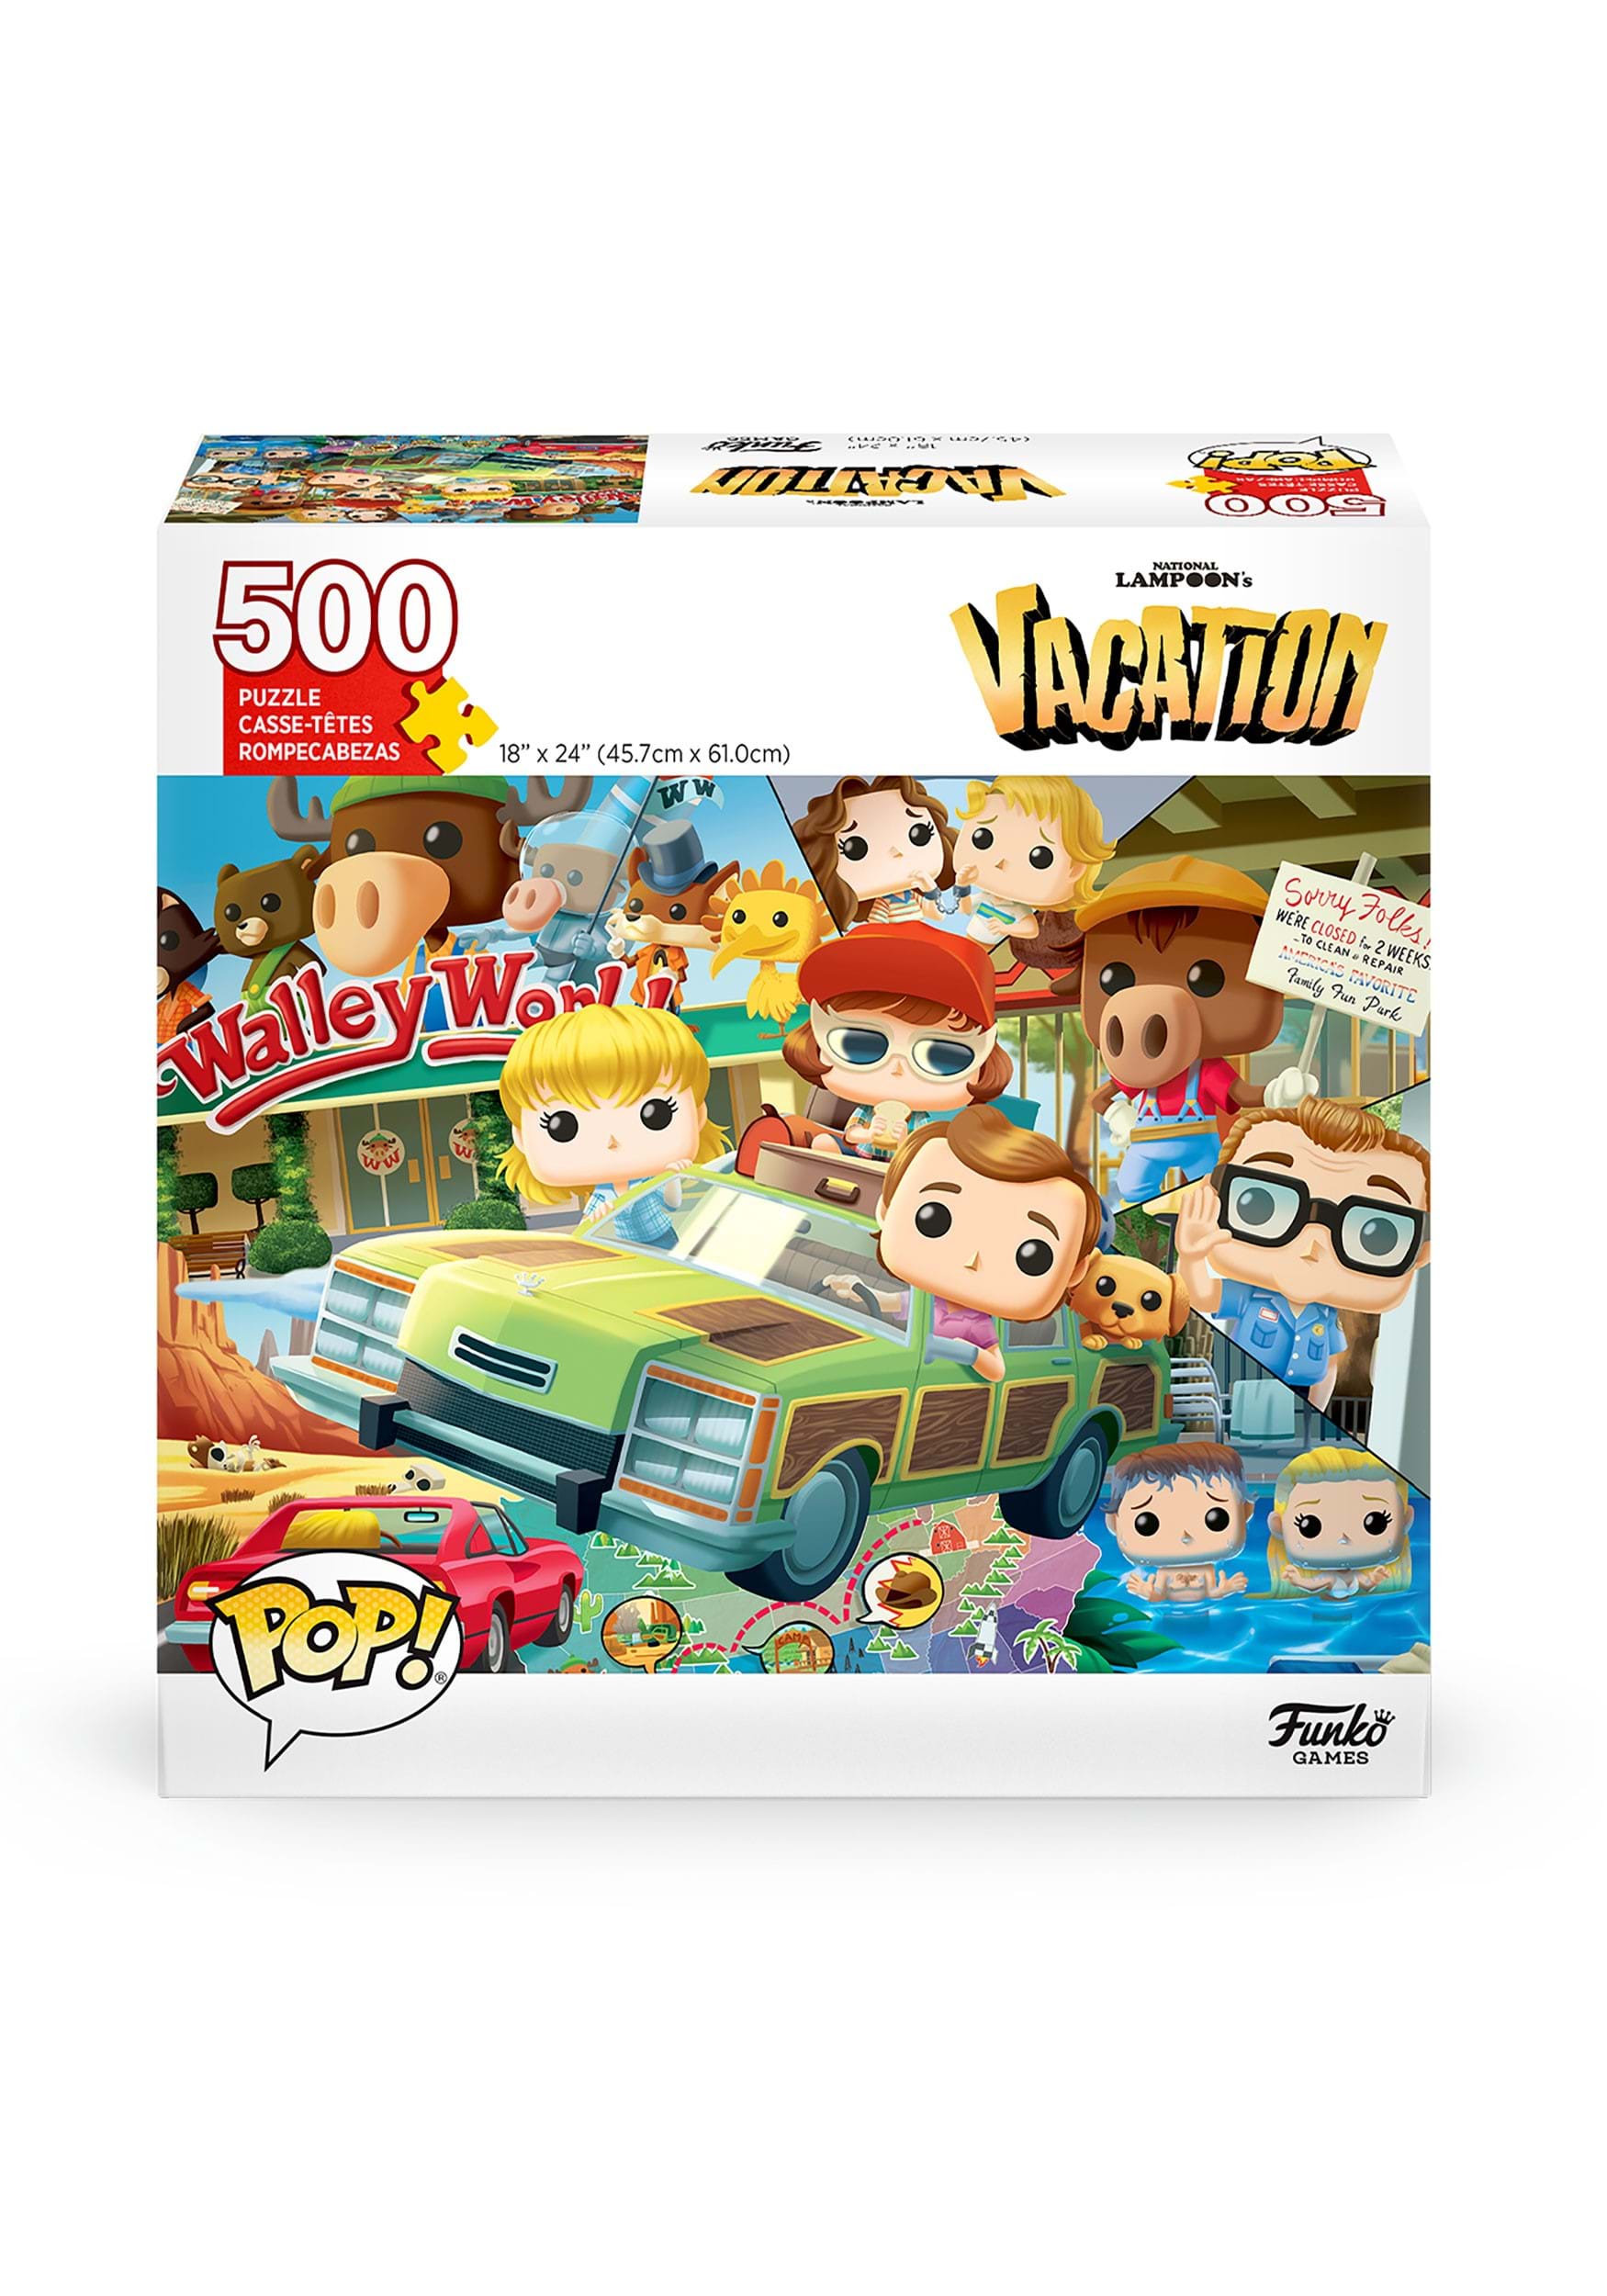 Funko POP! National Lampoons Vacation 500 Piece Puzzle